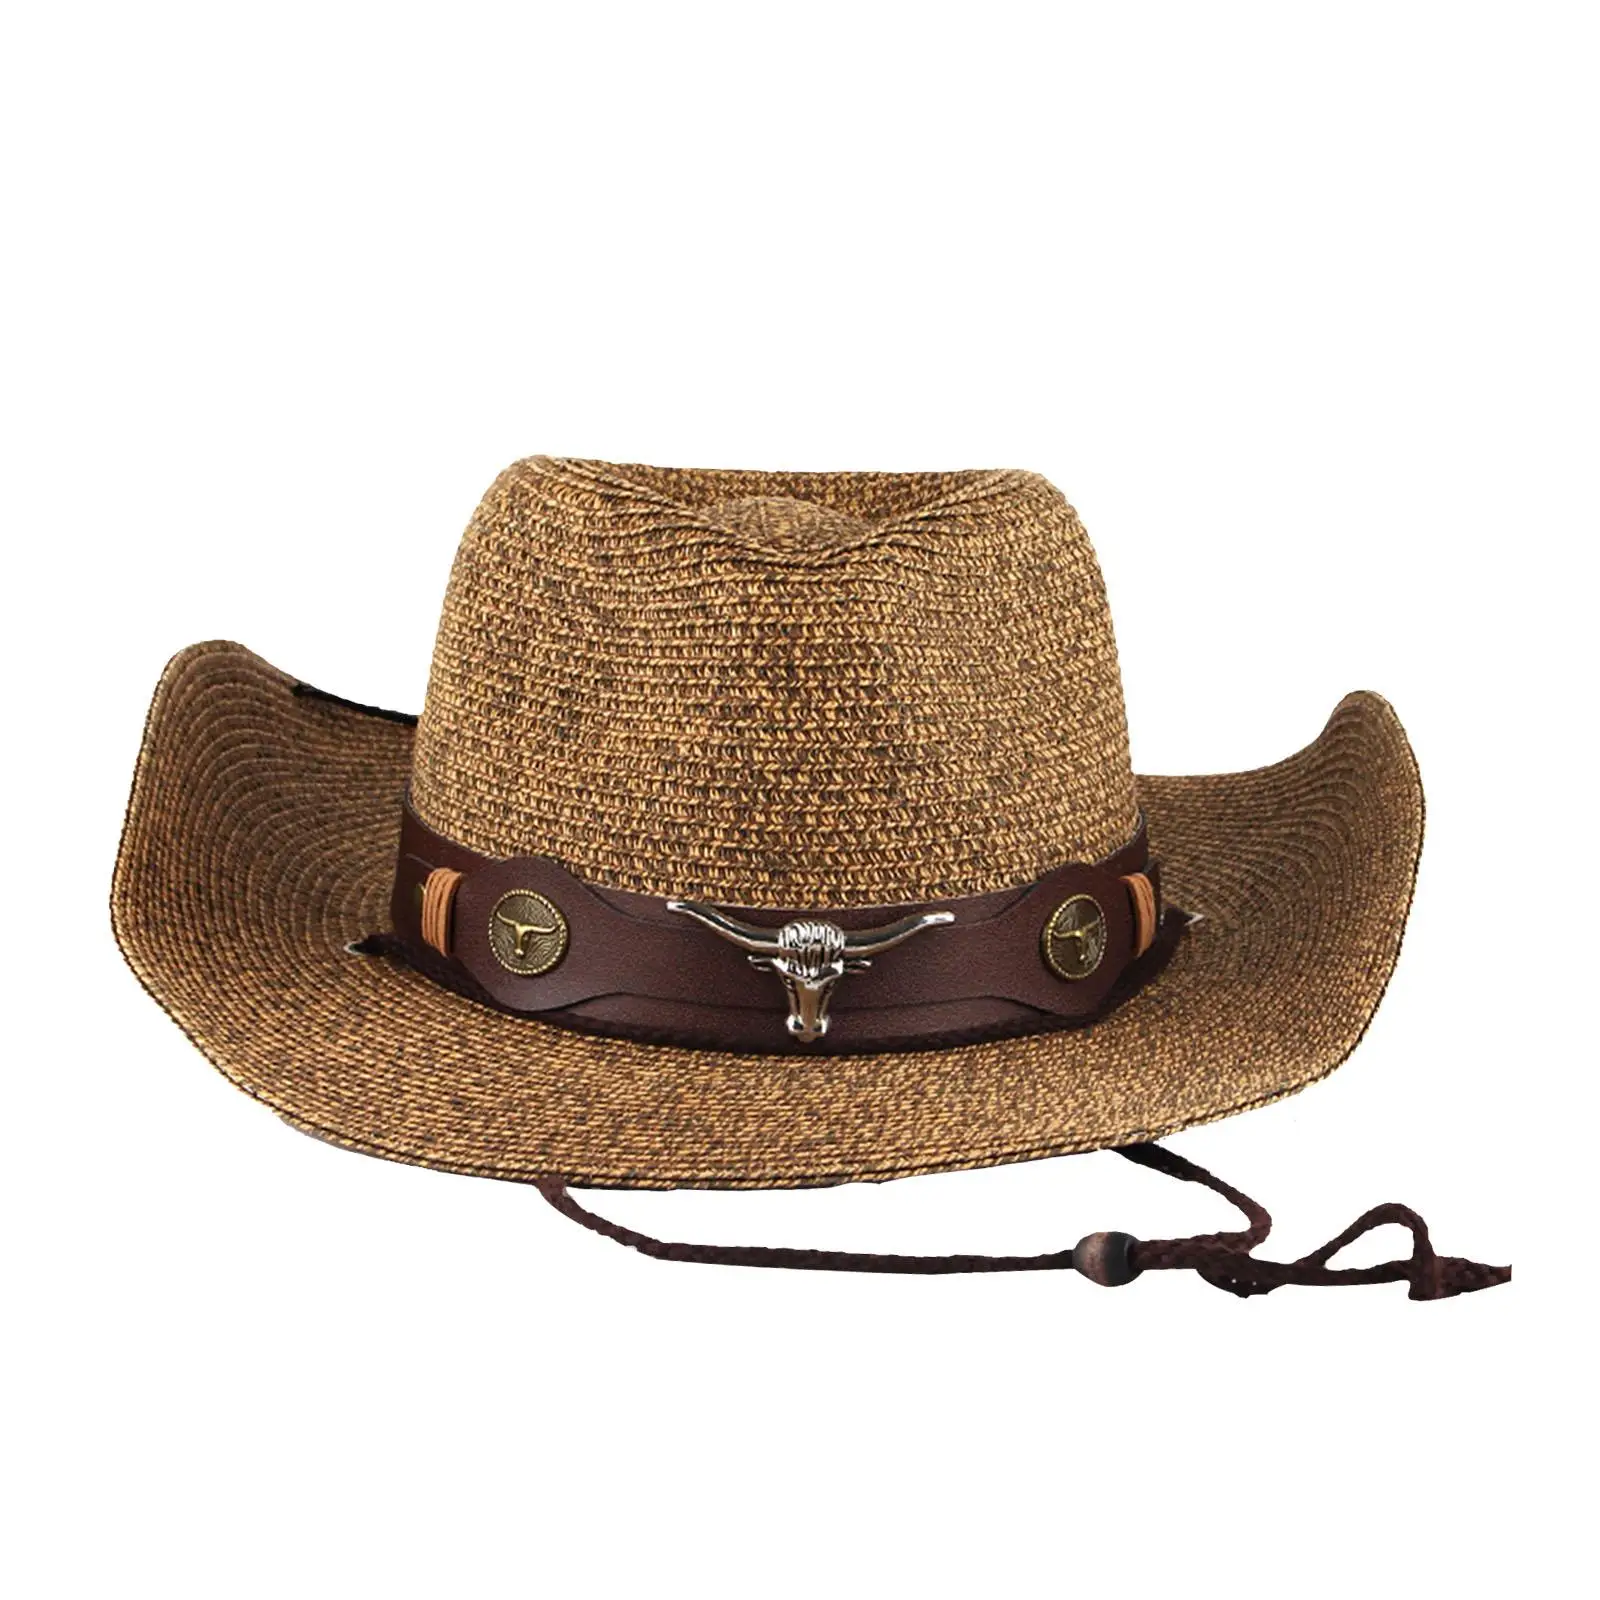 Straw Cowboy hat Sombreros Vagueros Roll up Brim Cowboy Hat Unisex Cowboy Hats for Outdoor Party Sun Protection Summer